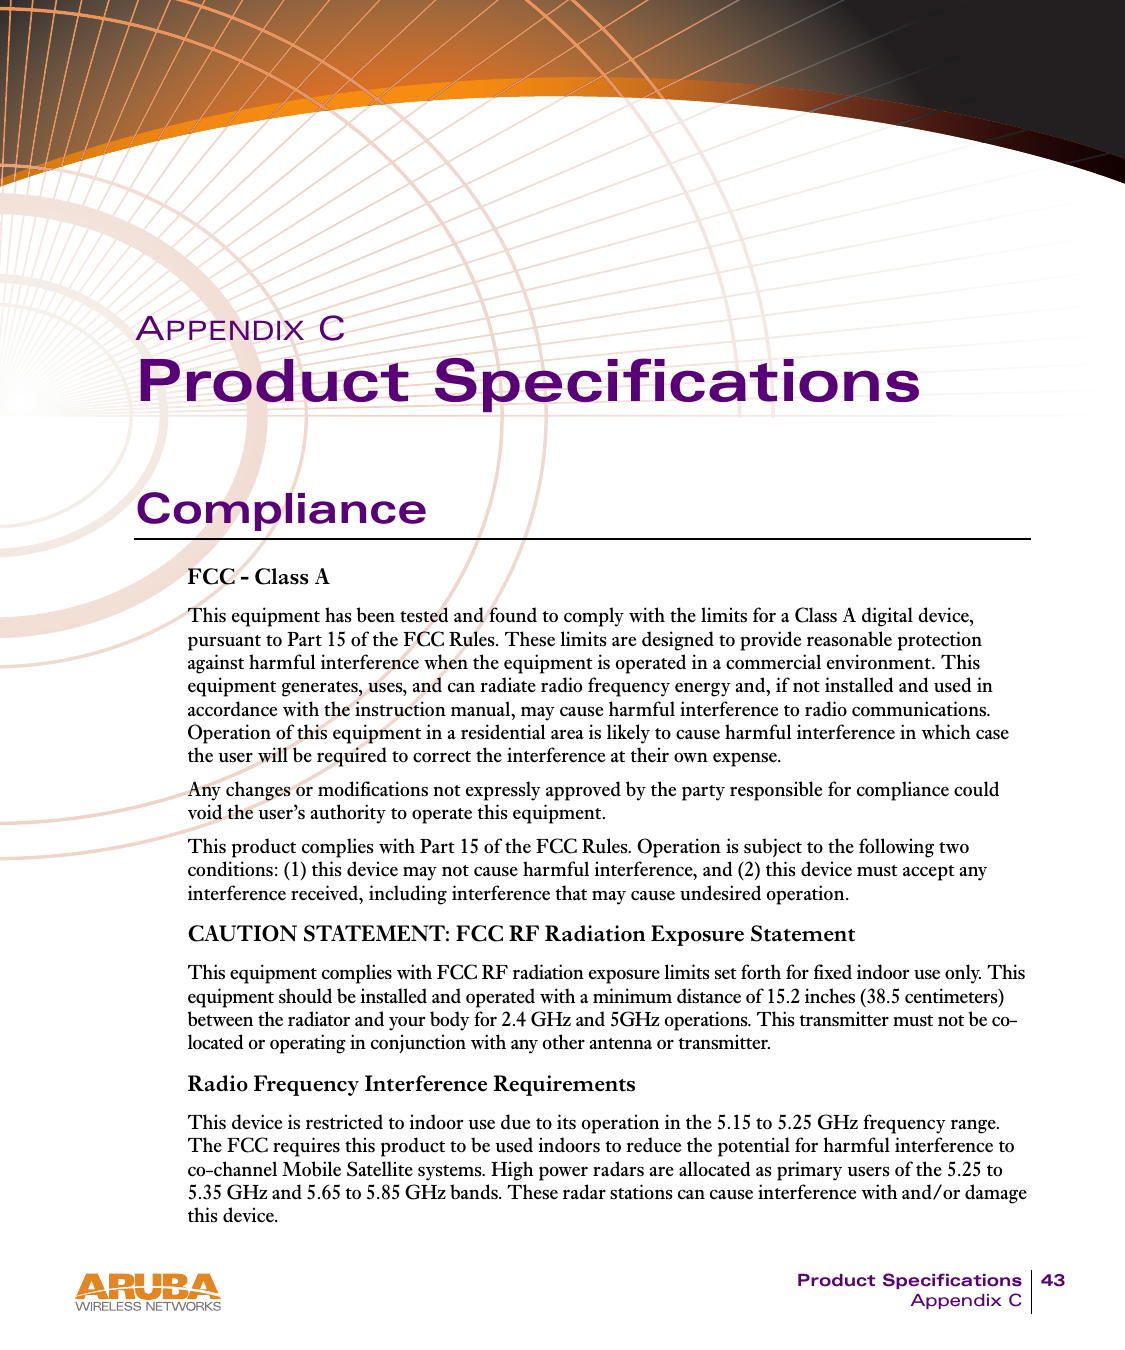 Product Specifications 43Appendix CAPPENDIX CProduct SpecificationsComplianceFCC - Class AThis equipment has been tested and found to comply with the limits for a Class A digital device, pursuant to Part 15 of the FCC Rules. These limits are designed to provide reasonable protection against harmful interference when the equipment is operated in a commercial environment. This equipment generates, uses, and can radiate radio frequency energy and, if not installed and used in accordance with the instruction manual, may cause harmful interference to radio communications. Operation of this equipment in a residential area is likely to cause harmful interference in which case the user will be required to correct the interference at their own expense.Any changes or modifications not expressly approved by the party responsible for compliance could void the user’s authority to operate this equipment.This product complies with Part 15 of the FCC Rules. Operation is subject to the following two conditions: (1) this device may not cause harmful interference, and (2) this device must accept any interference received, including interference that may cause undesired operation.CAUTION STATEMENT: FCC RF Radiation Exposure StatementThis equipment complies with FCC RF radiation exposure limits set forth for fixed indoor use only. This equipment should be installed and operated with a minimum distance of 15.2 inches (38.5 centimeters) between the radiator and your body for 2.4 GHz and 5GHz operations. This transmitter must not be co-located or operating in conjunction with any other antenna or transmitter.Radio Frequency Interference RequirementsThis device is restricted to indoor use due to its operation in the 5.15 to 5.25 GHz frequency range. The FCC requires this product to be used indoors to reduce the potential for harmful interference to co-channel Mobile Satellite systems. High power radars are allocated as primary users of the 5.25 to 5.35 GHz and 5.65 to 5.85 GHz bands. These radar stations can cause interference with and/or damage this device.